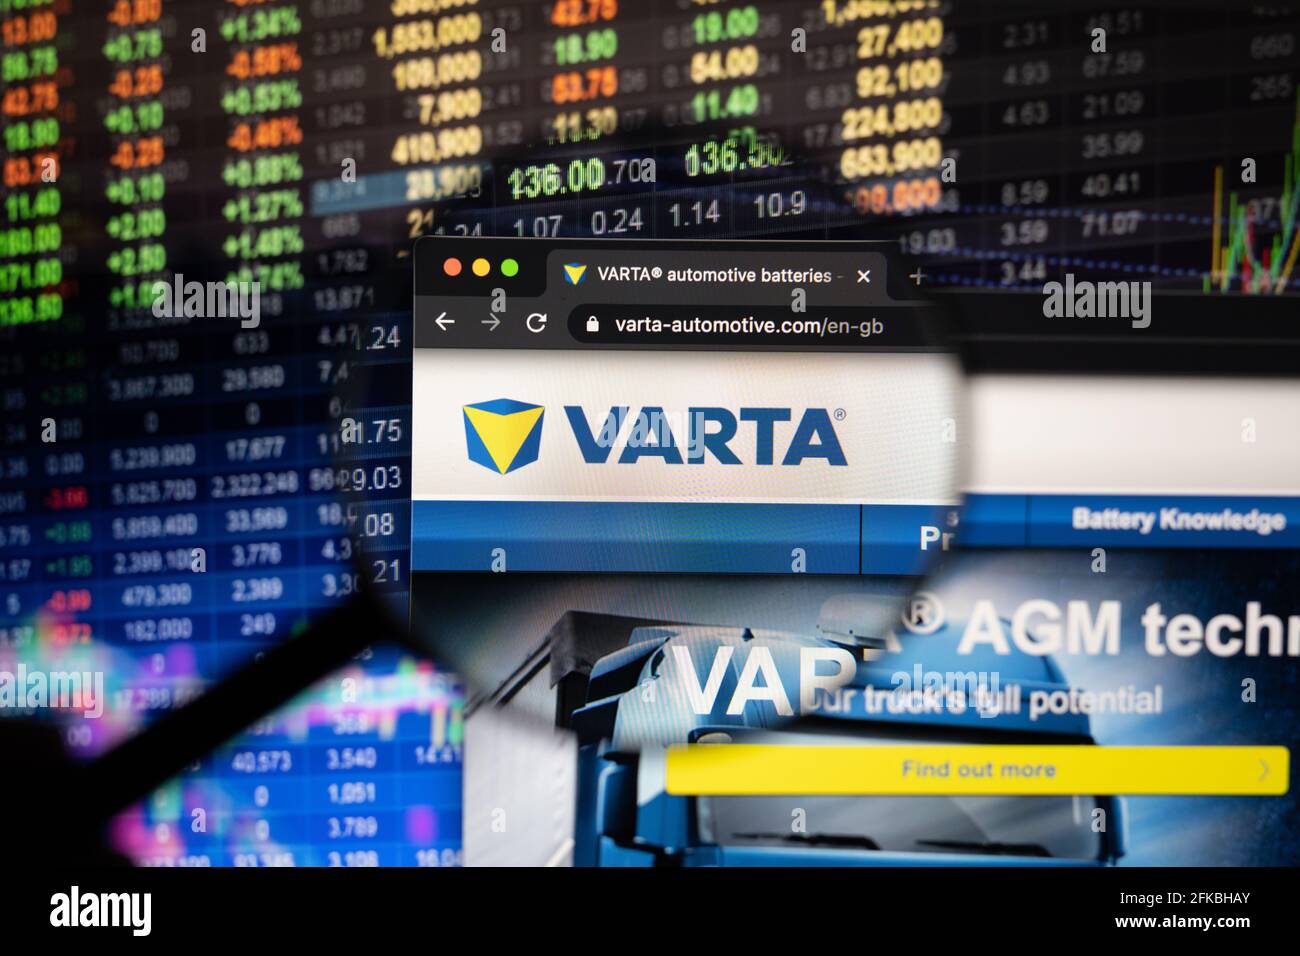 Varta company logo on a website with blurry stock market developments in the background, seen on a computer screen through a magnifying glass Stock Photo